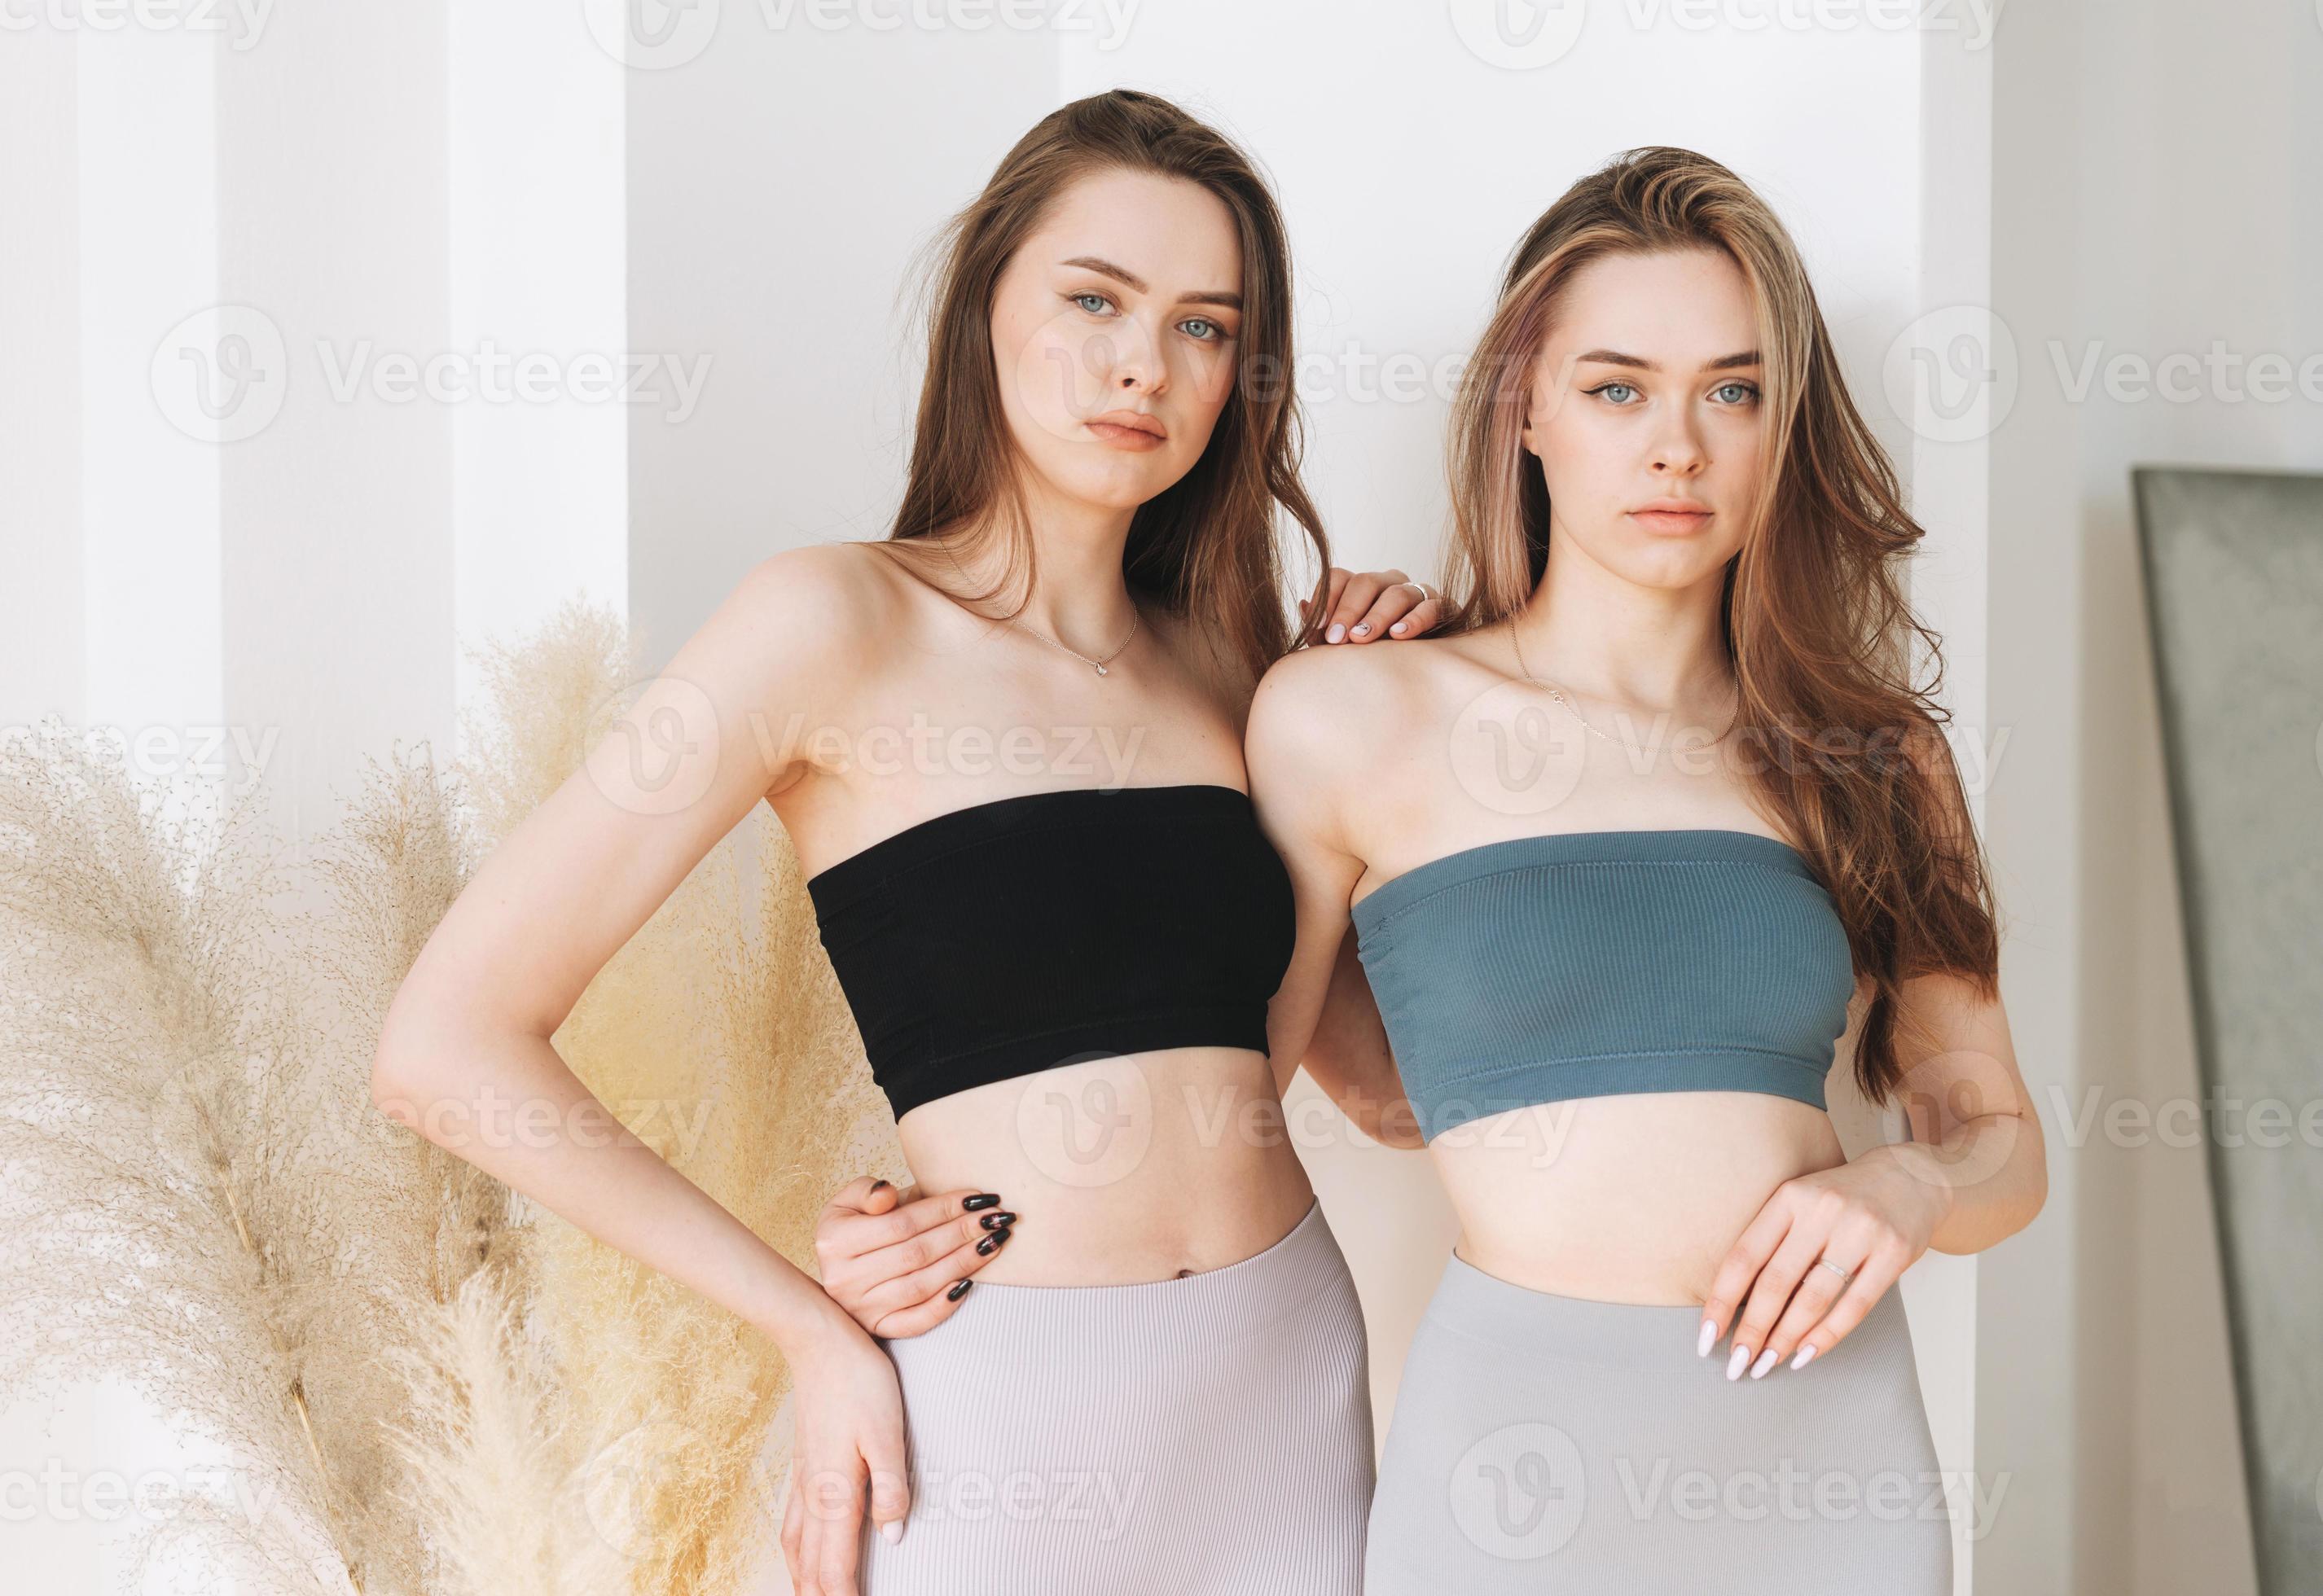 Fashion beauty models two sisters twins beautiful girls with long